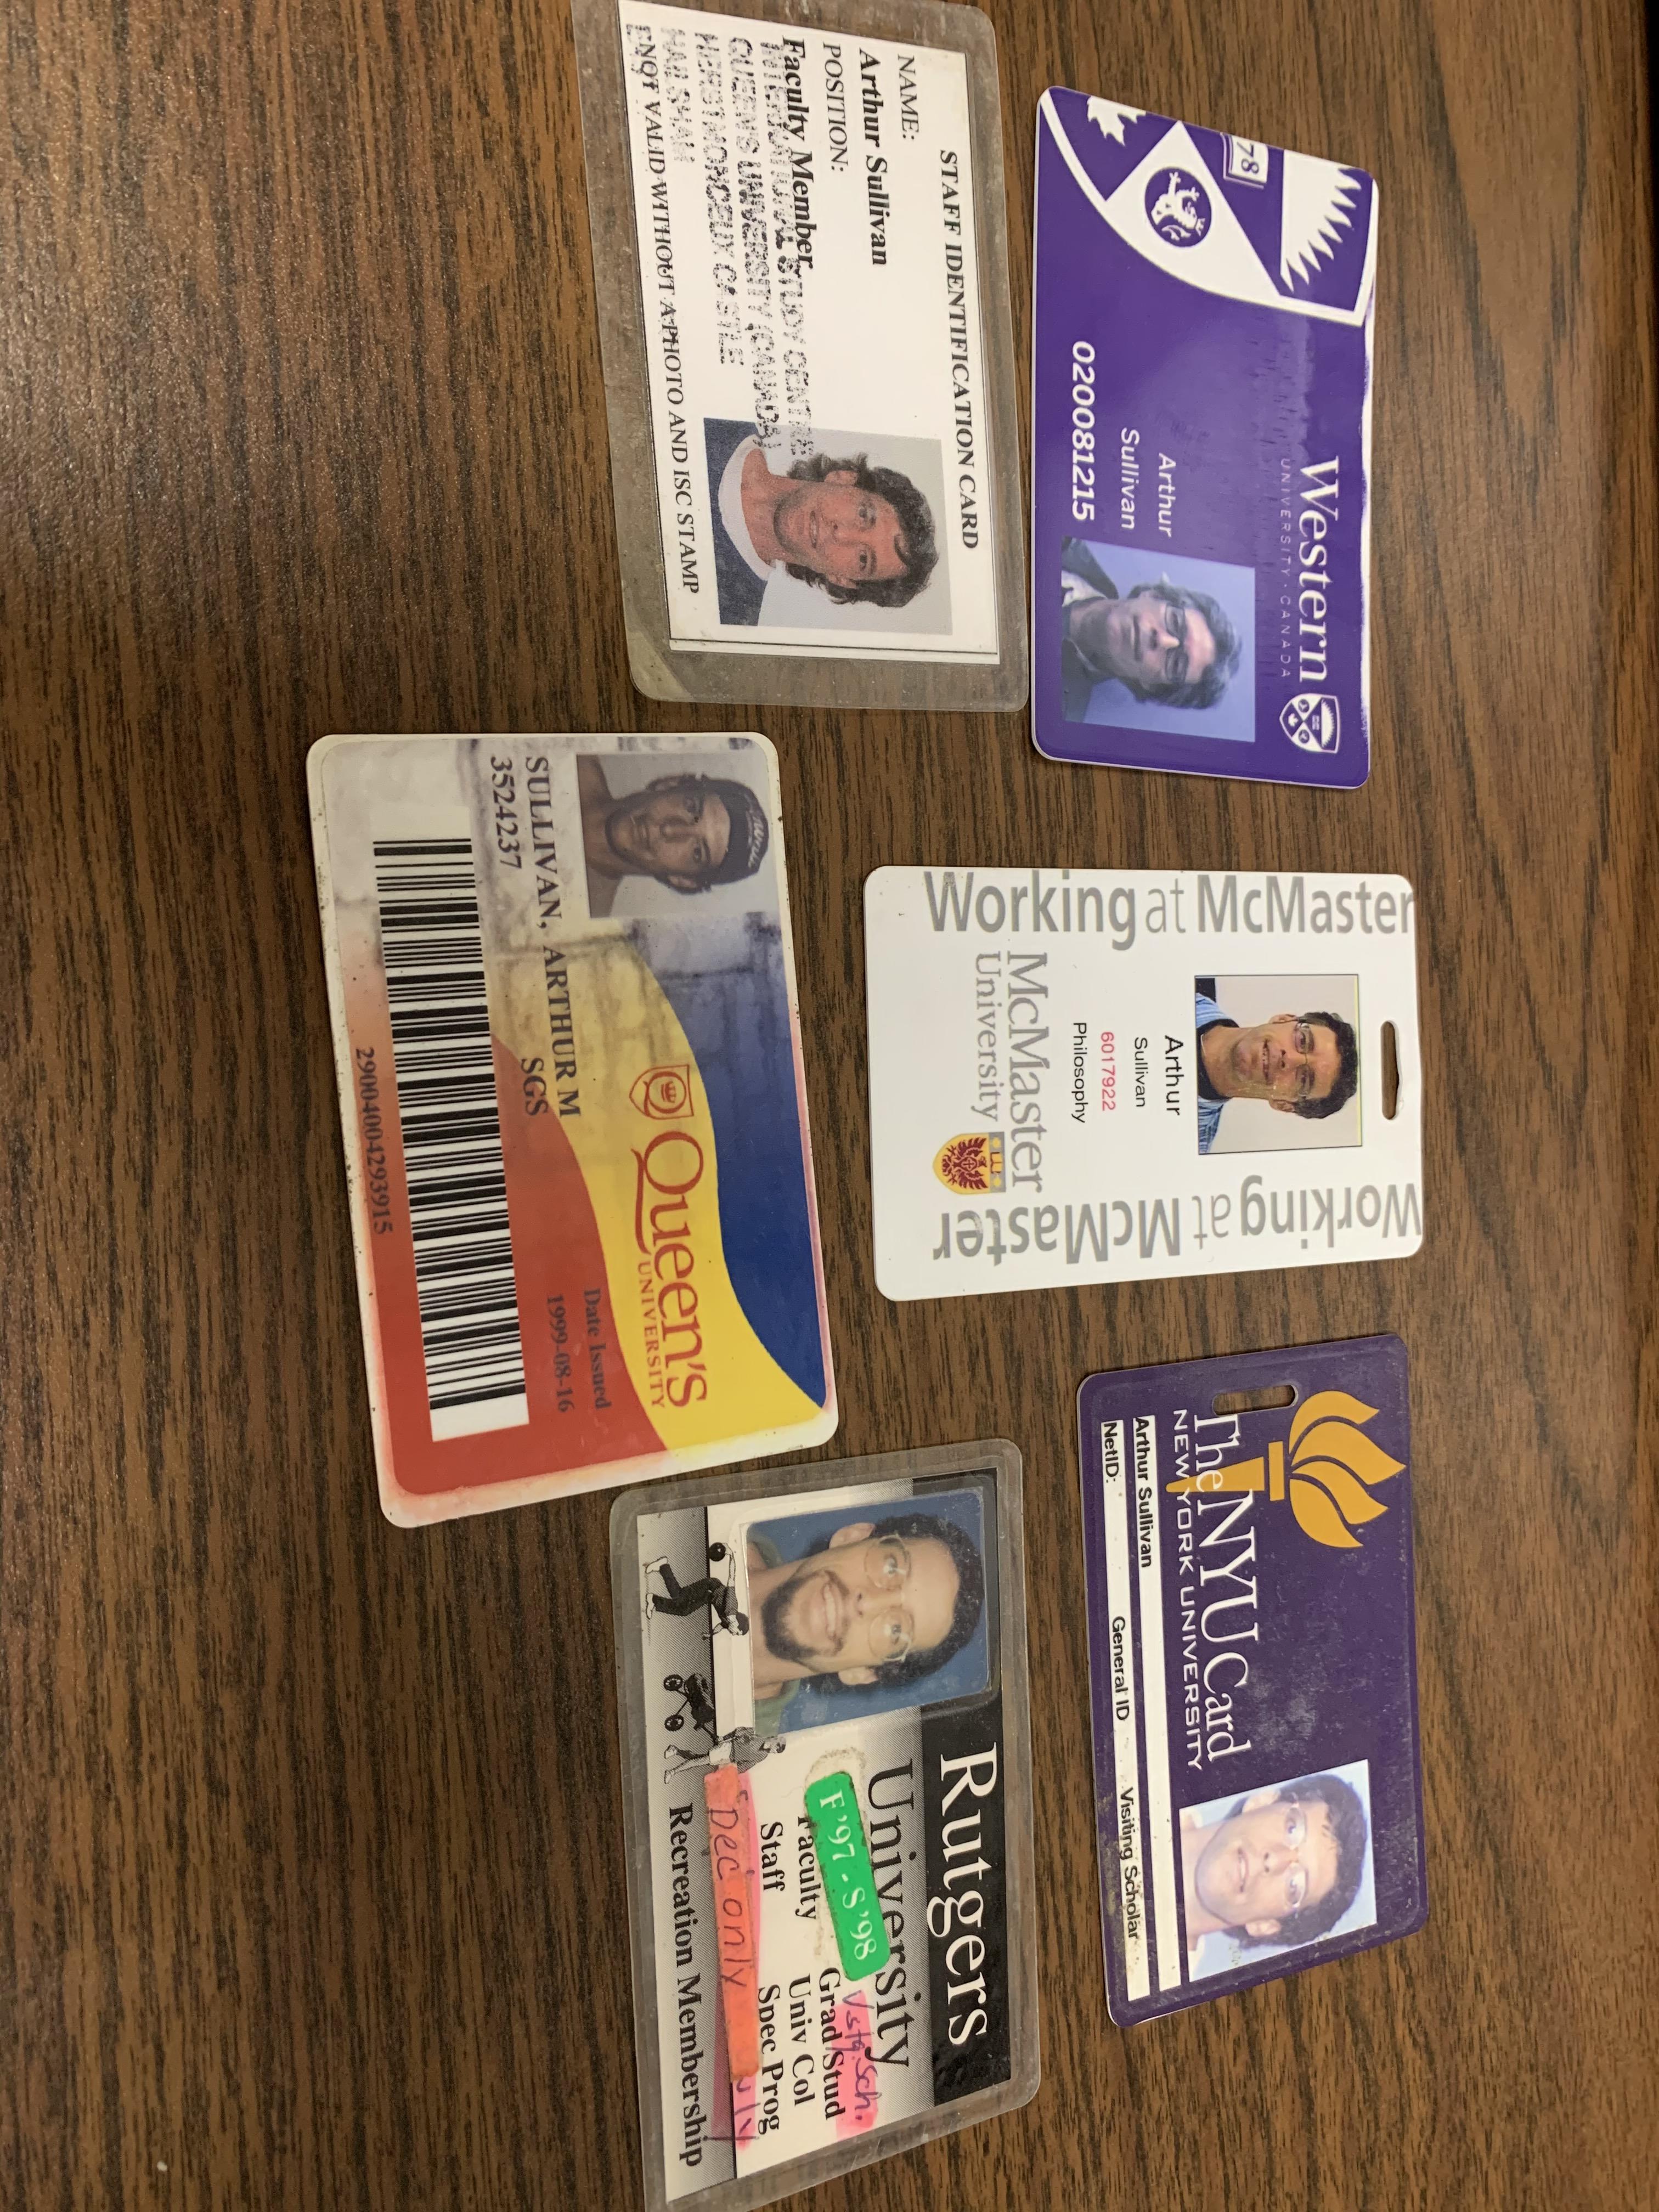 A collection of ID cards from the following universities: Western University; Queen's University; McMaster; NYU; and Rutgers University.